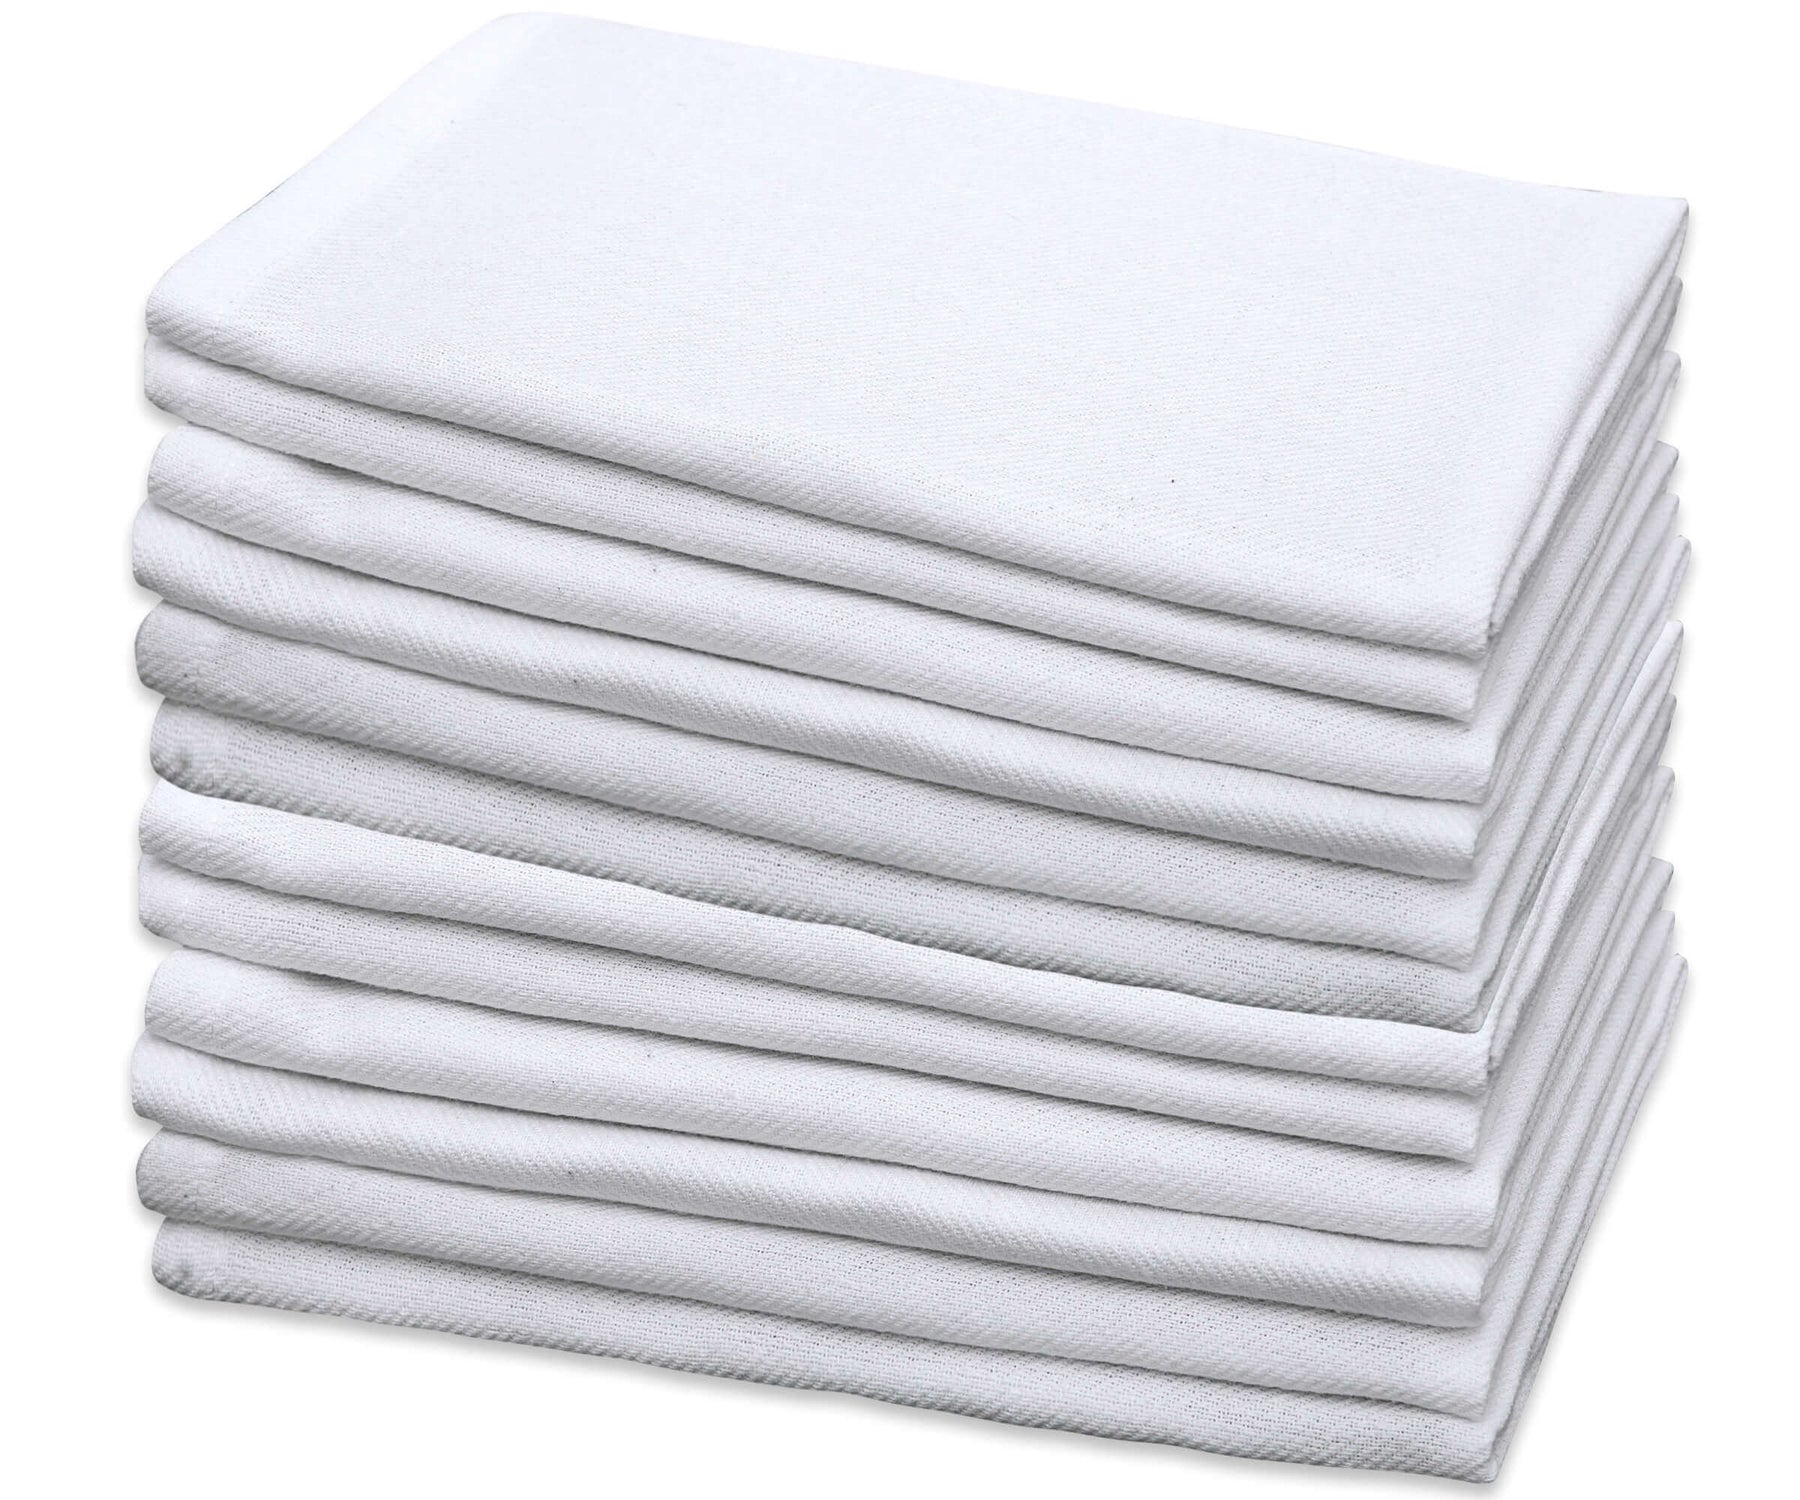 Folded White Cloth Napkins of size 20× 20 , set of 12 are arranged one above another. 